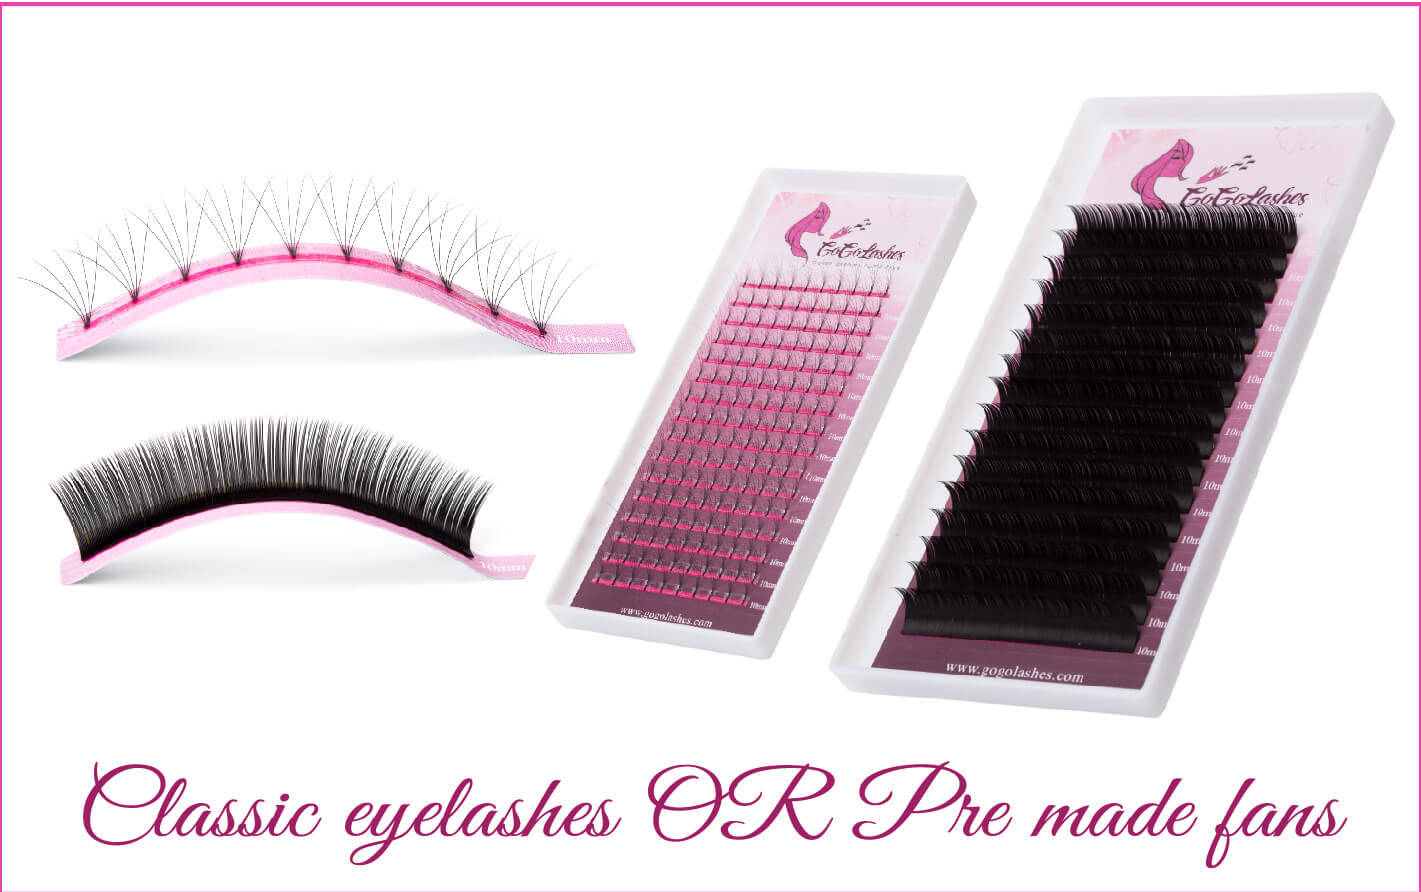 Classic Eyelash Extensions or PreMade Fans